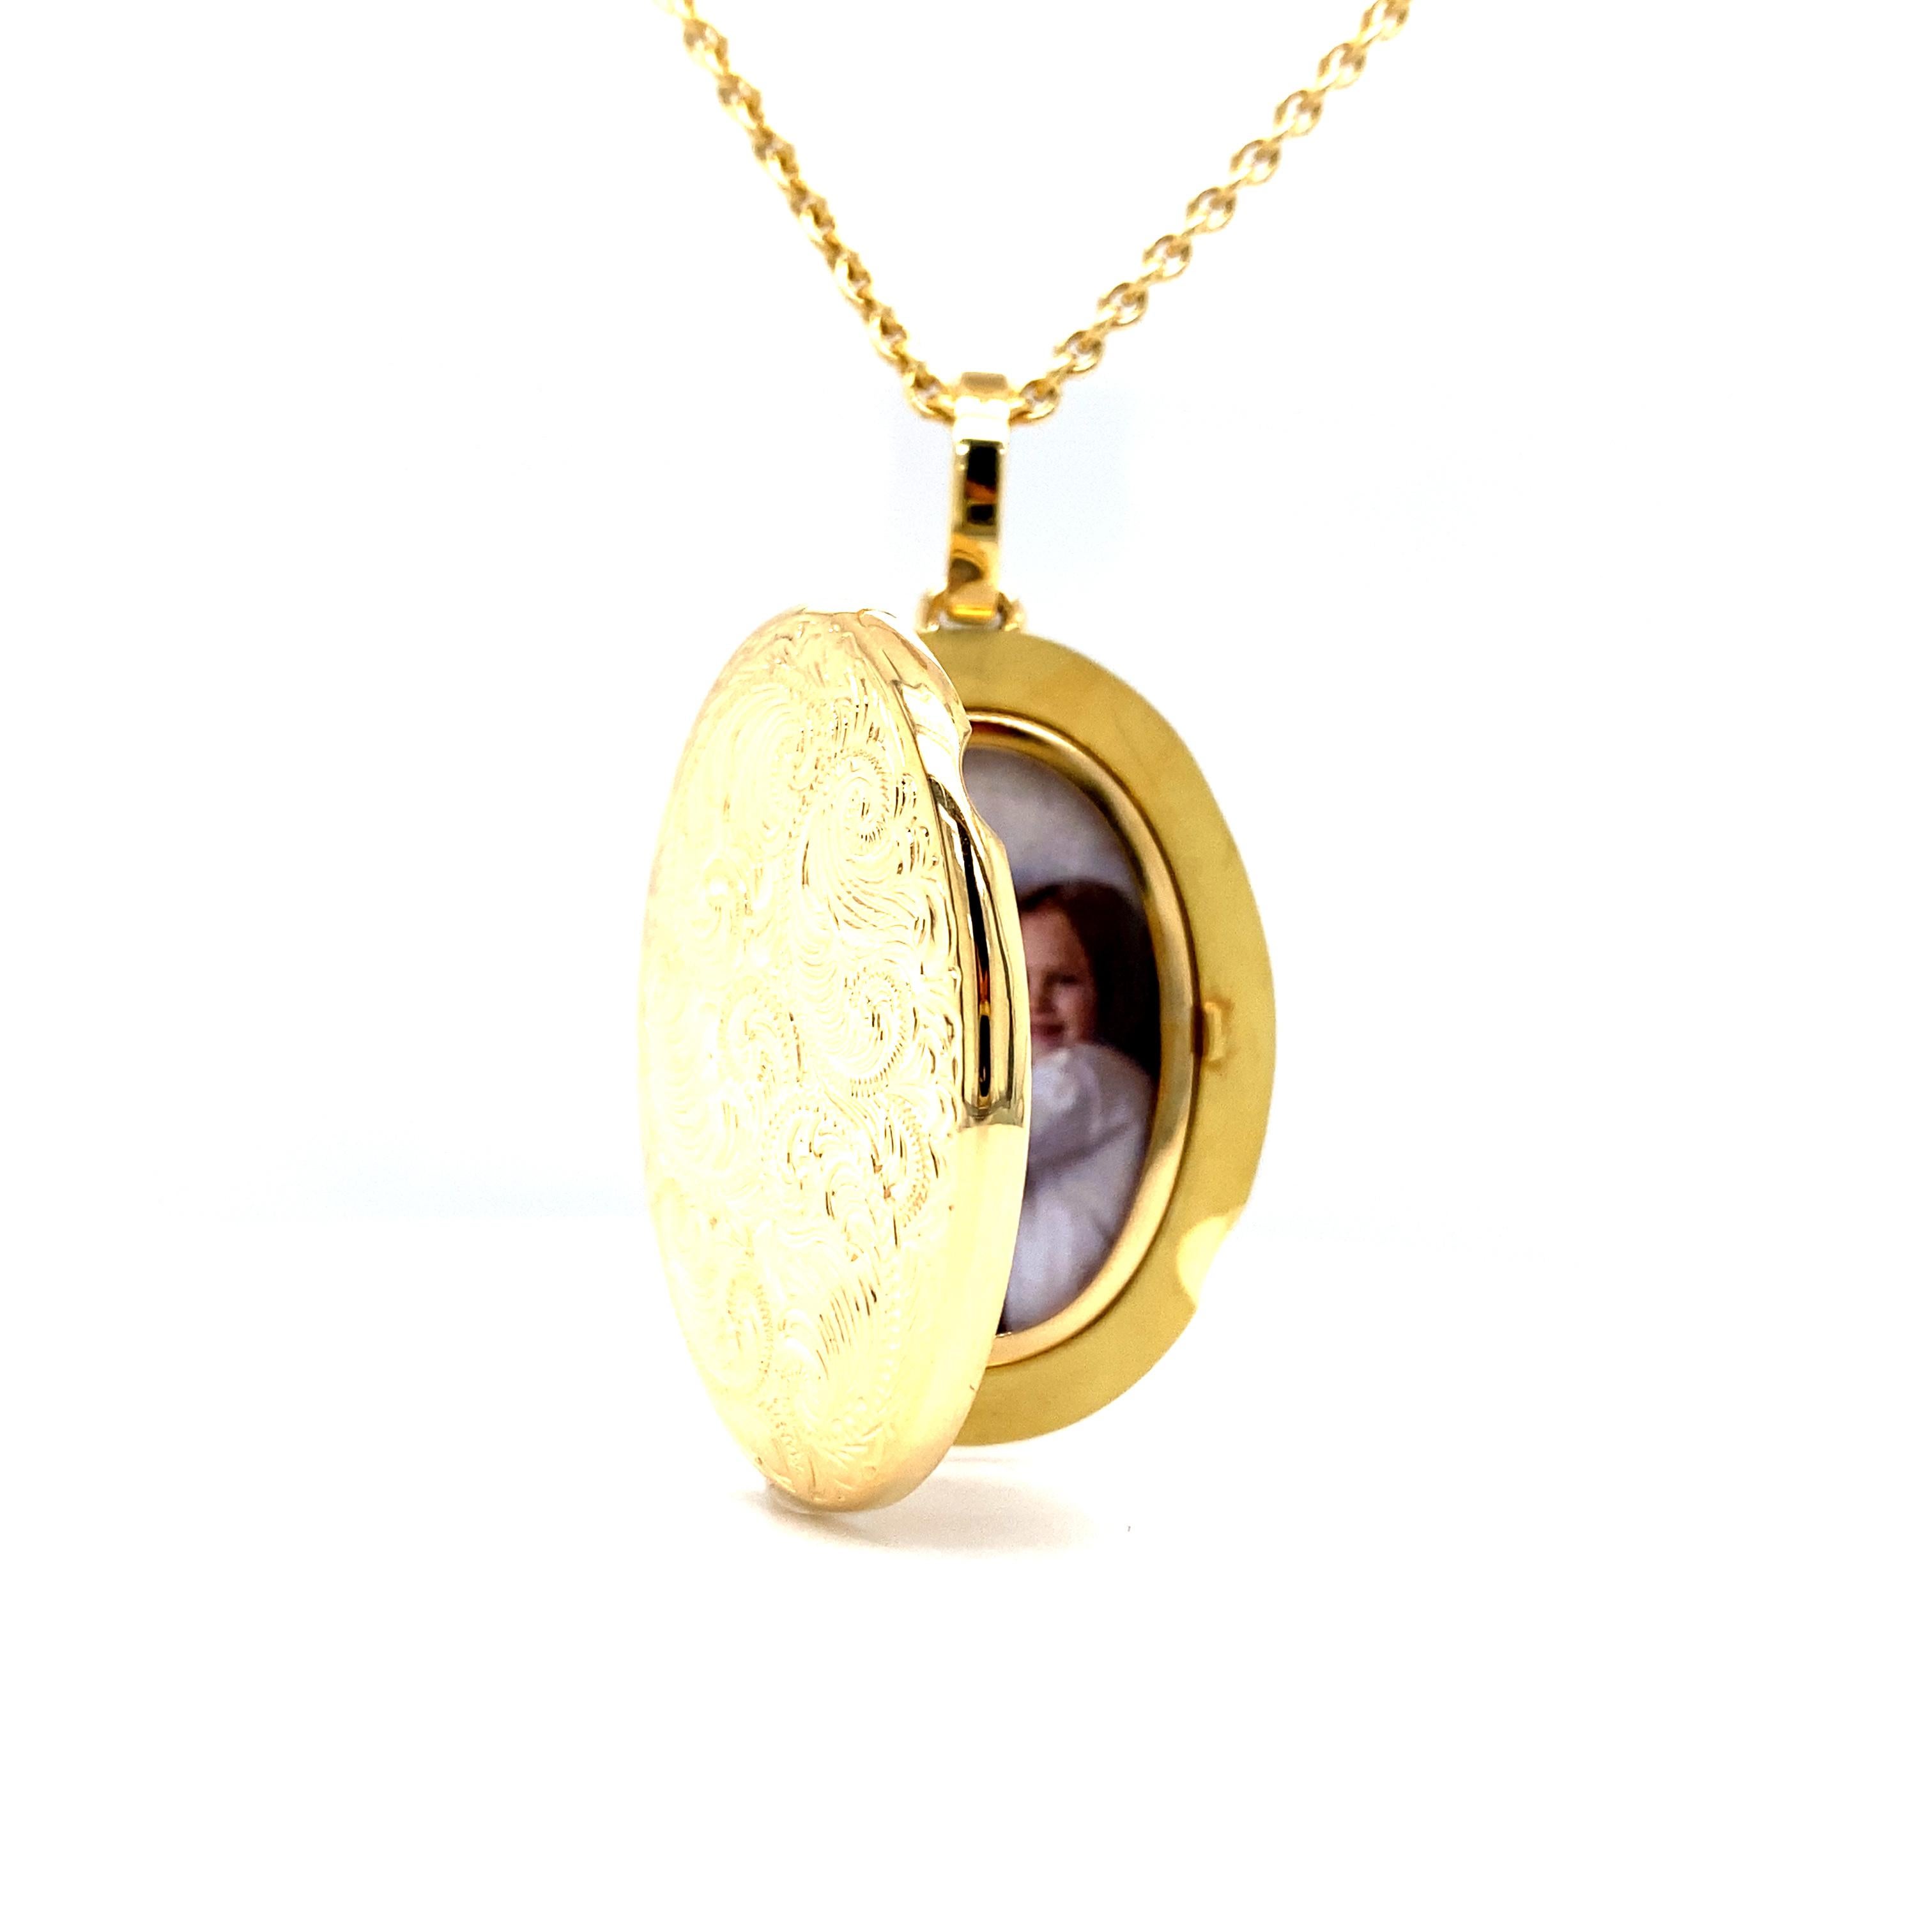 Oval Locket Pendant with Scroll Engraving - 18k Yellow Gold - 32.0 x 23.0 mm For Sale 6